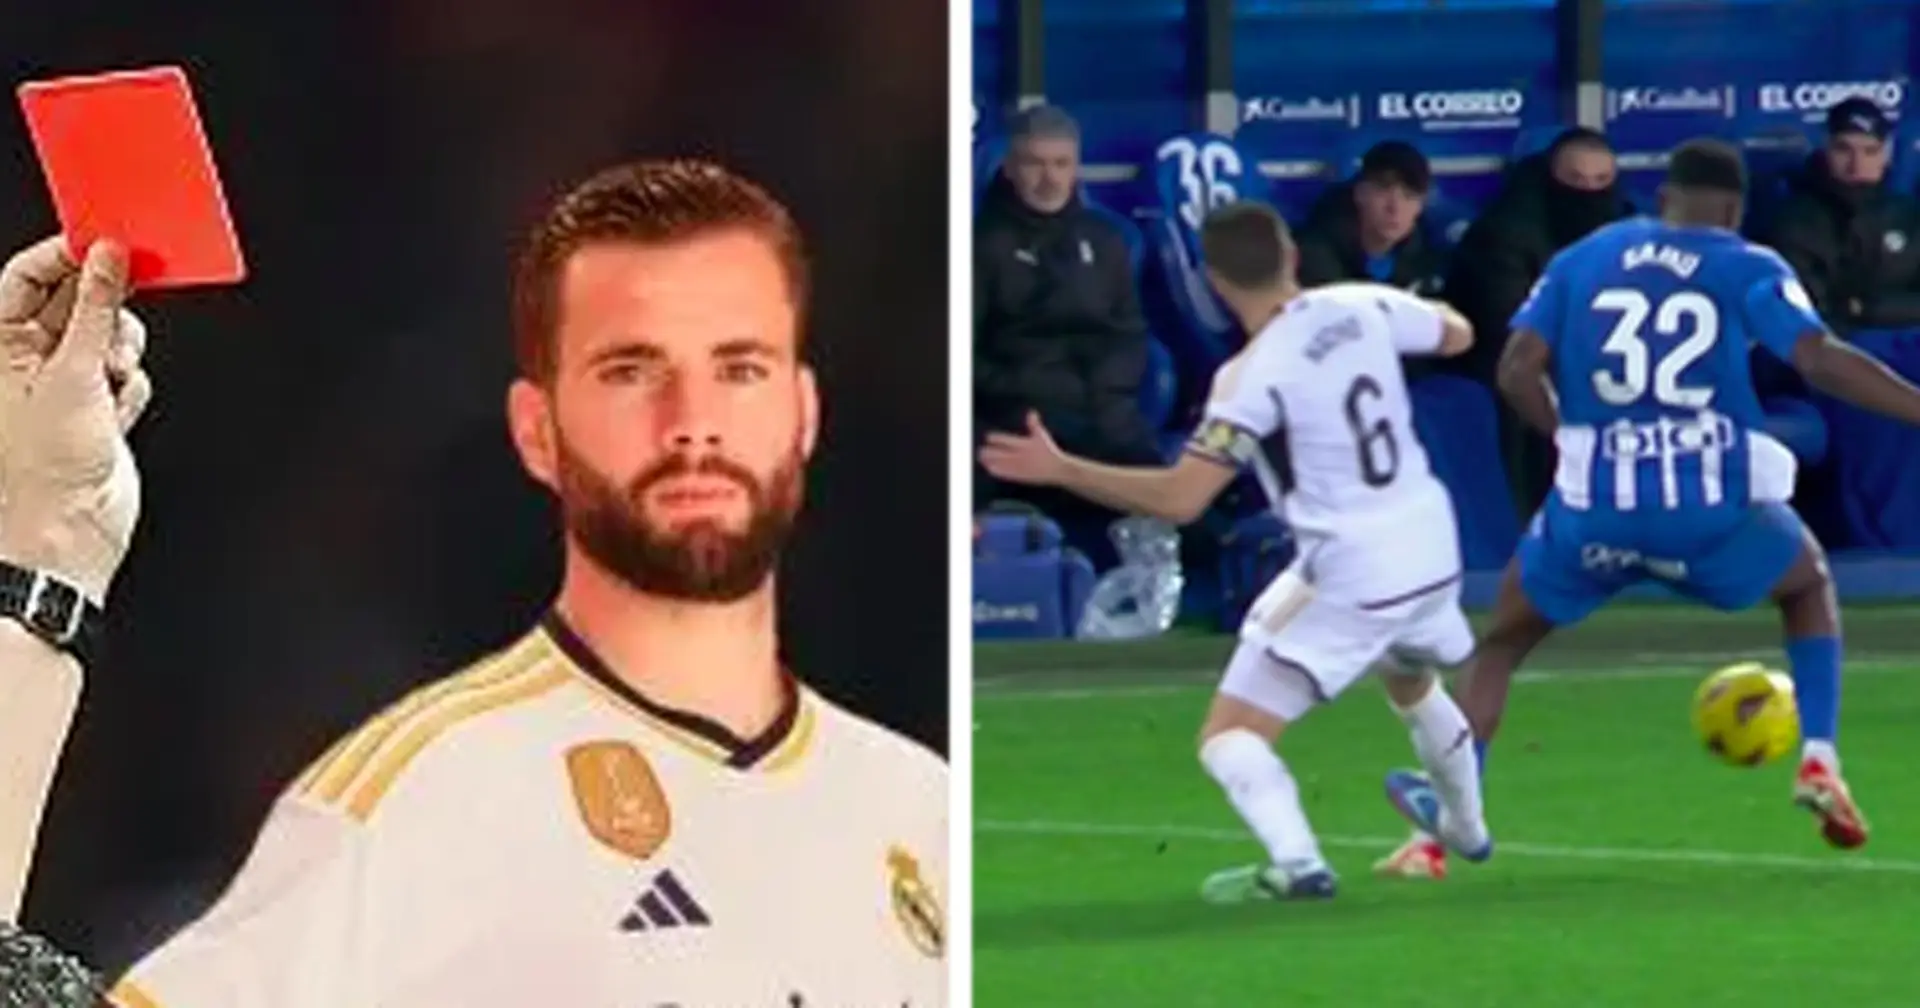 How many games will Nacho miss through suspension?